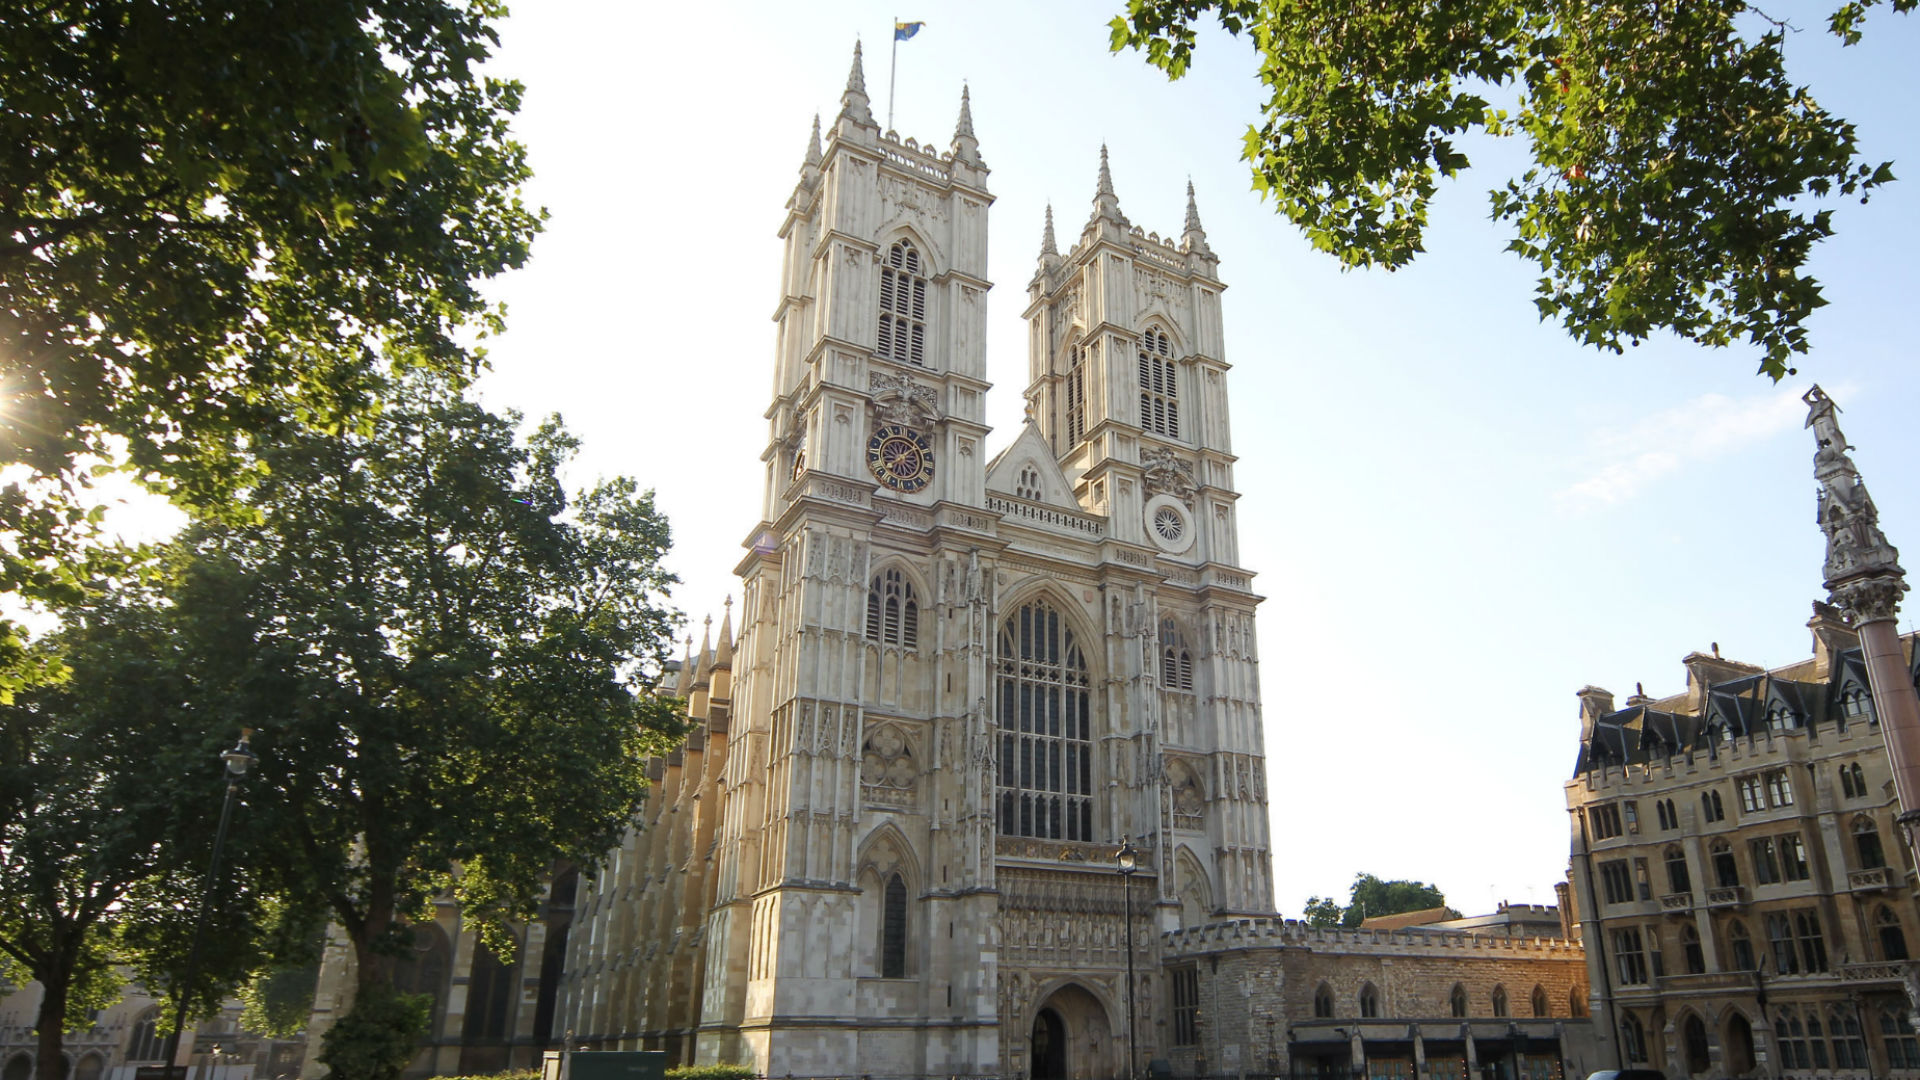 Exterior view of Westminster Abbey with leafy trees and sunshine